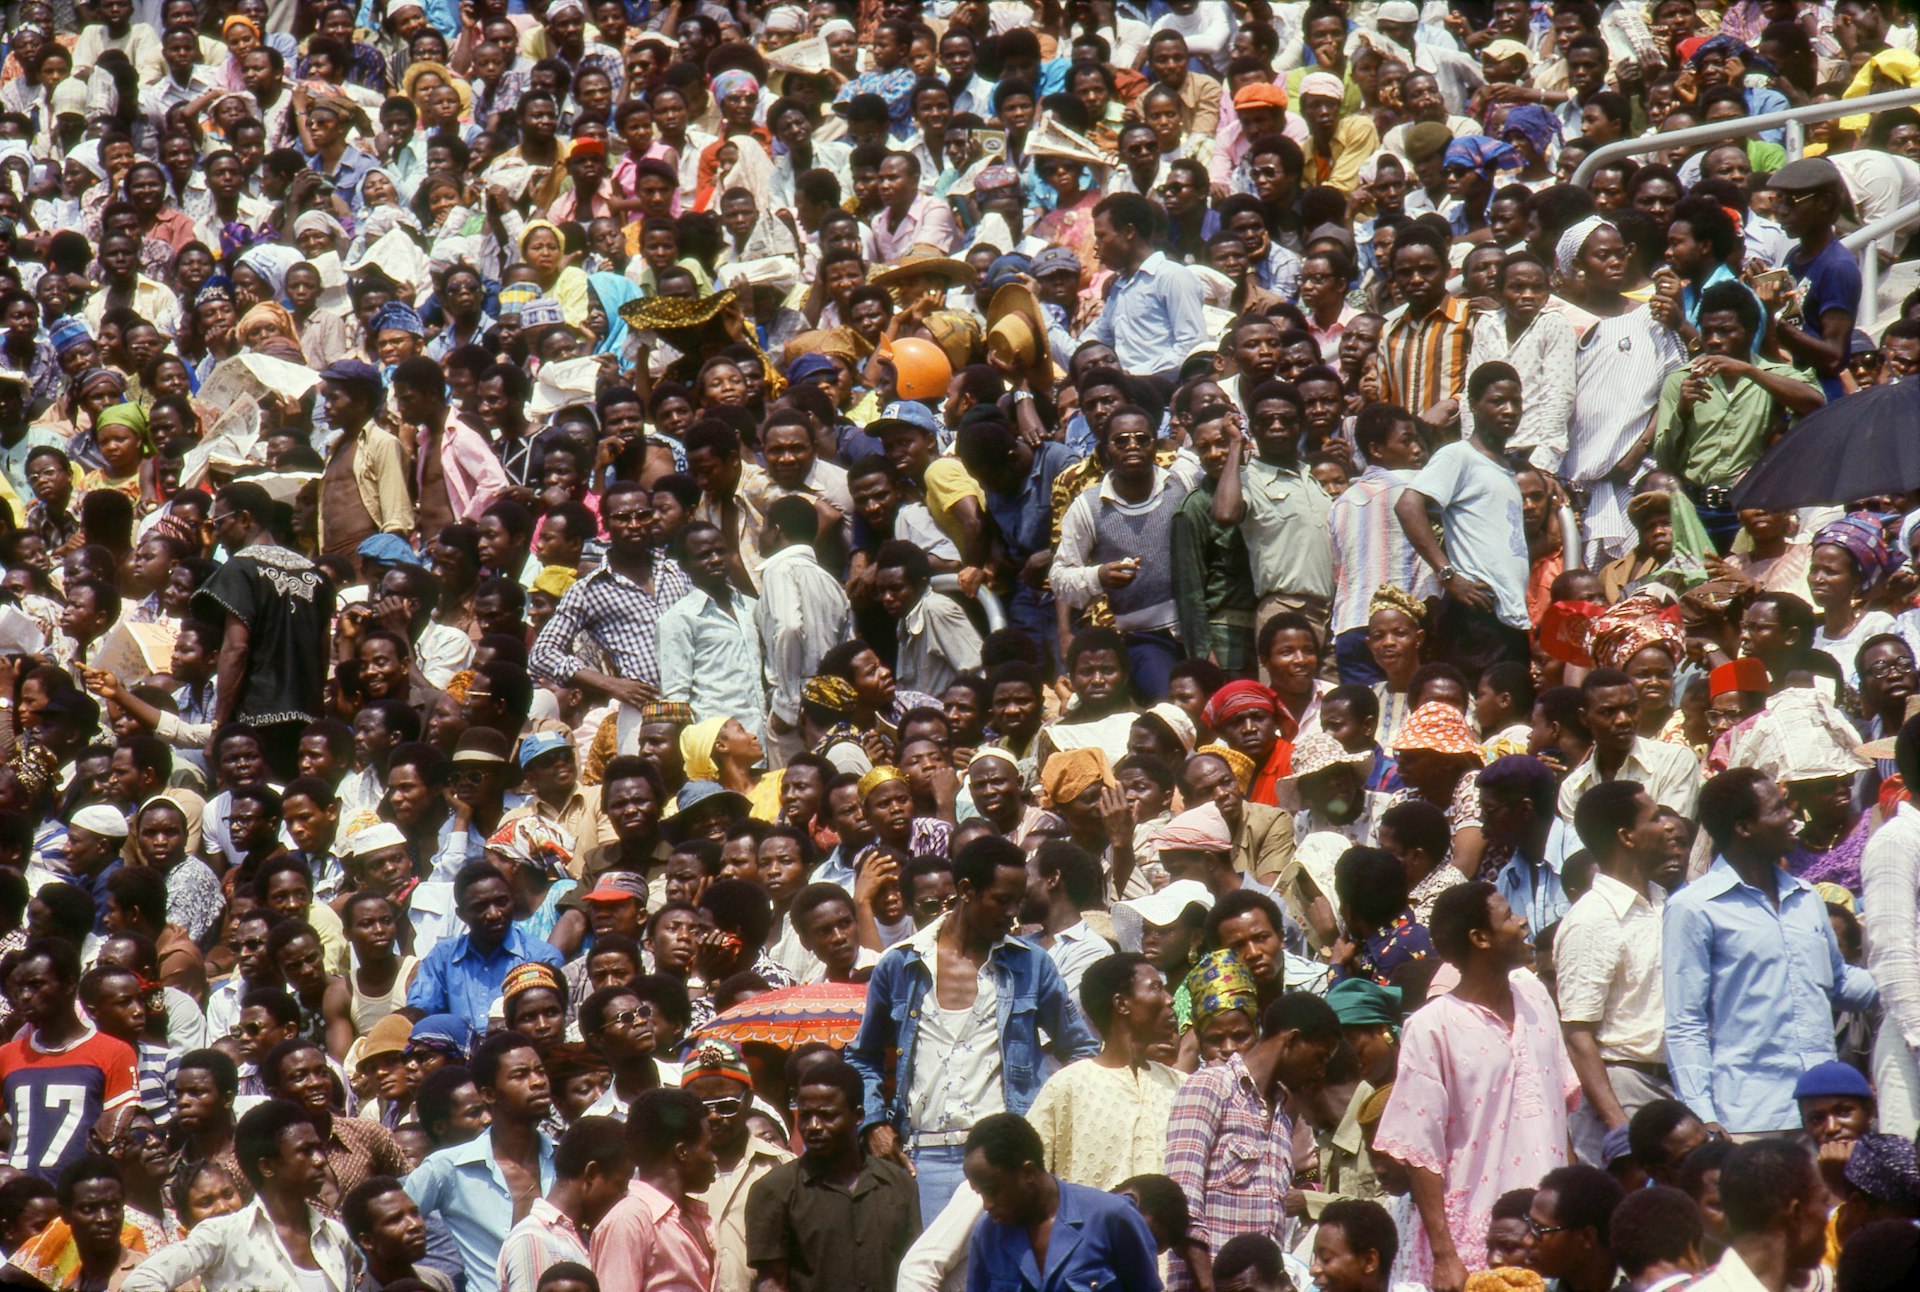 Revisiting FESTAC ‘77, the largest pan-African festival in World history